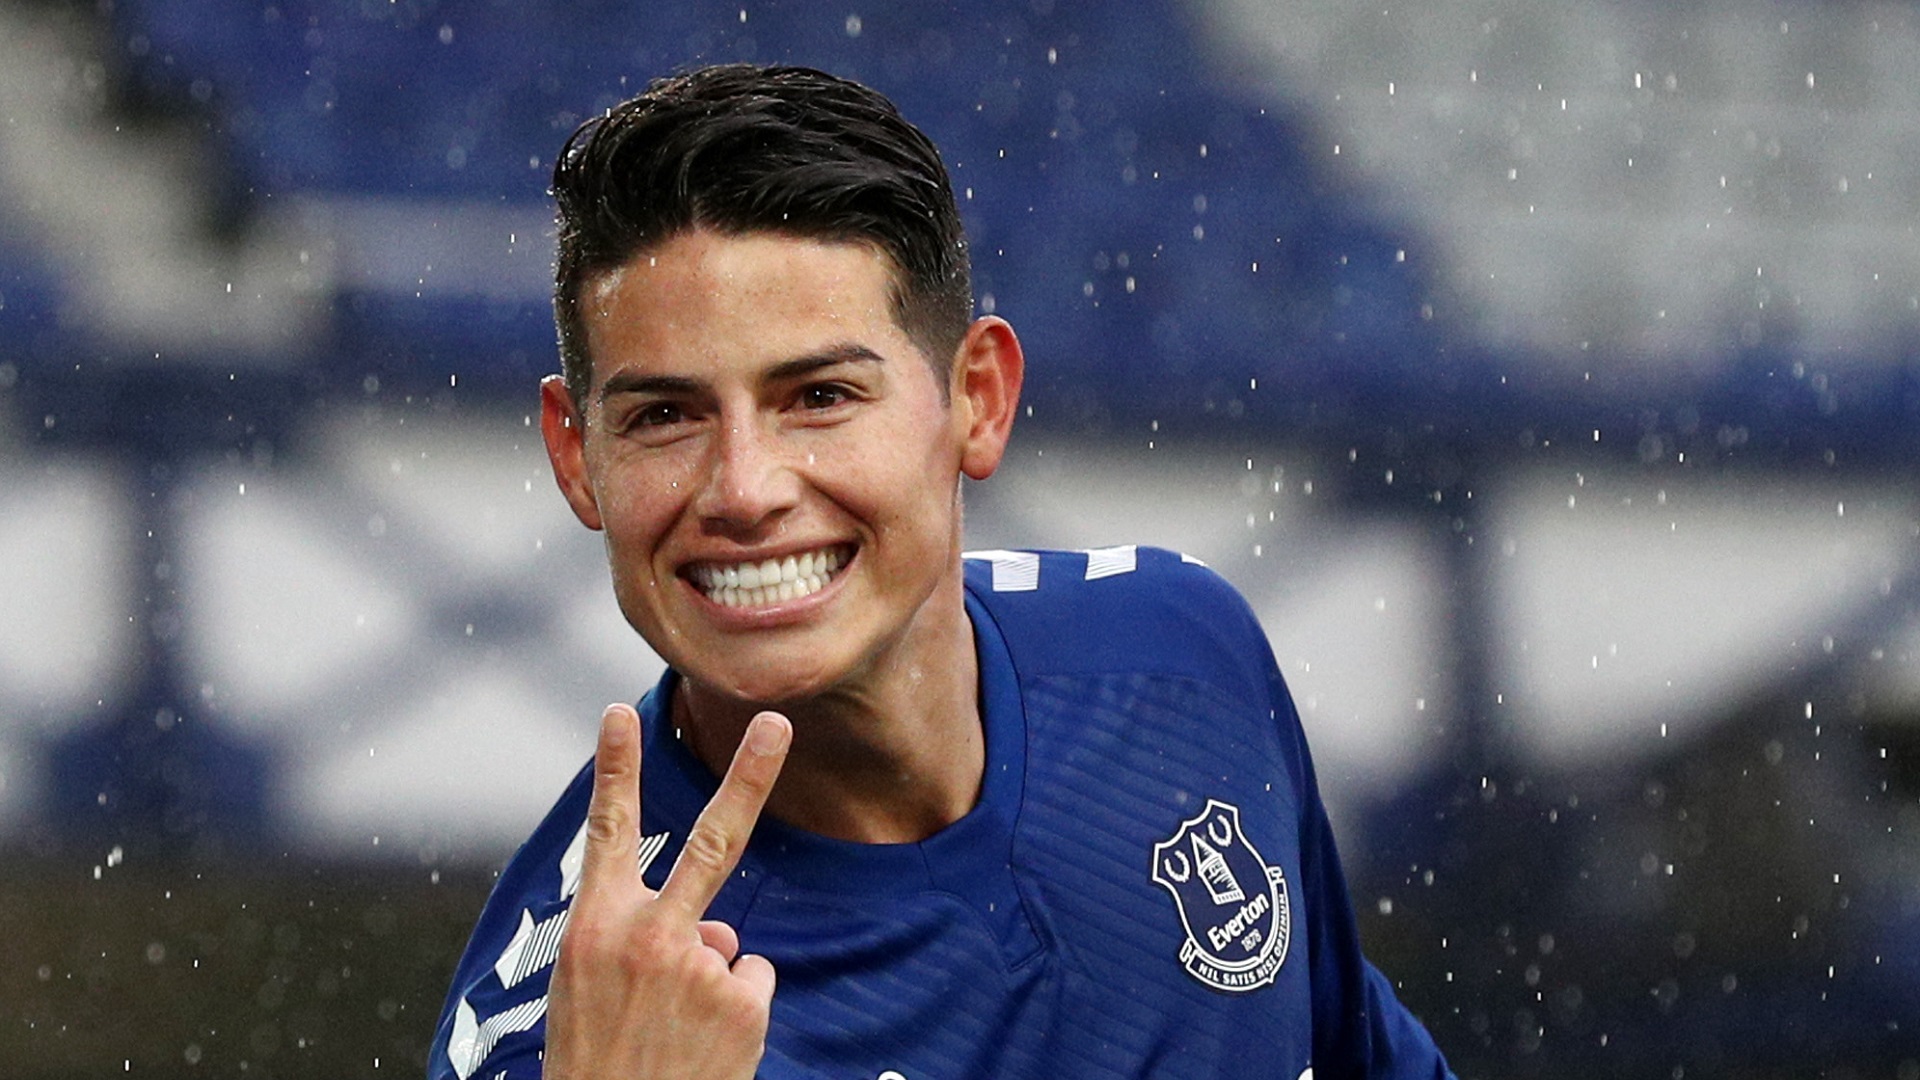 James Rodriguez reveals retirement may not be far off as Everton star discusses future plans